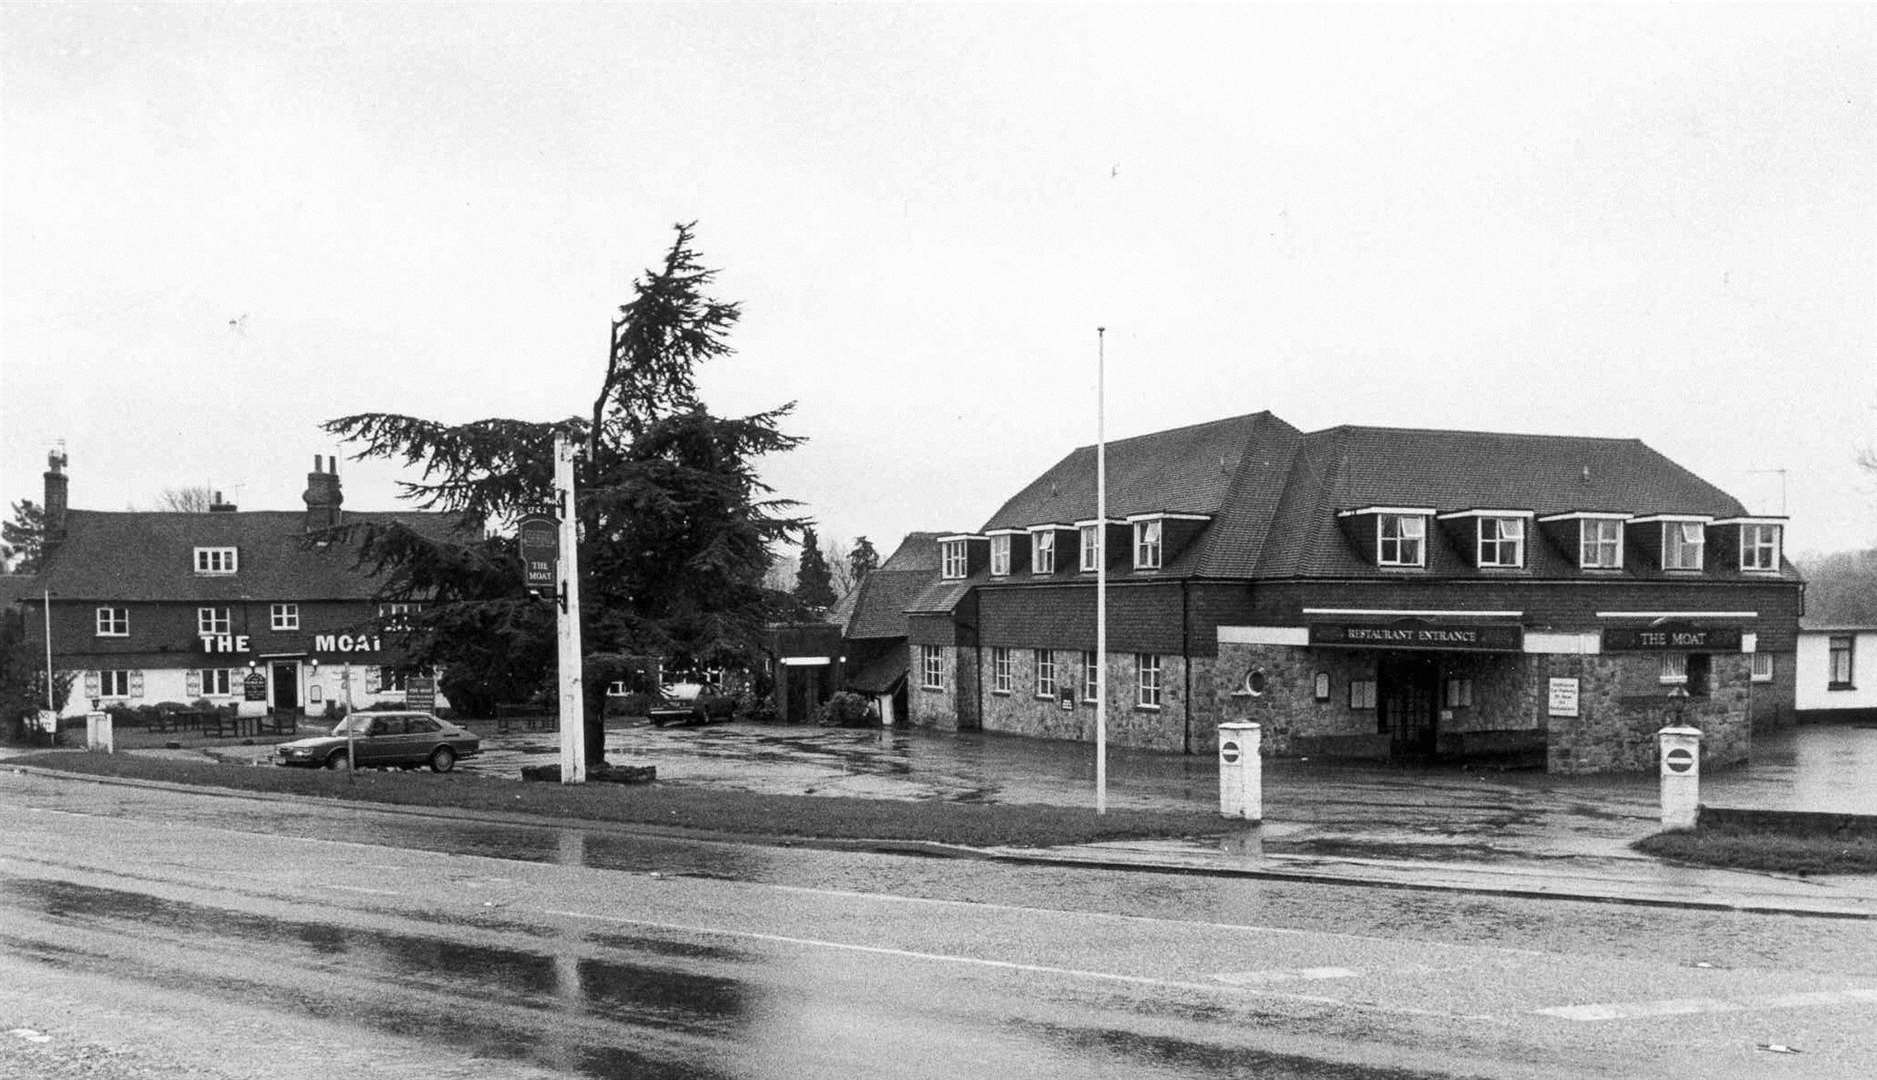 The Moat Hotel & Restaurant in Wrotham in February, 1987